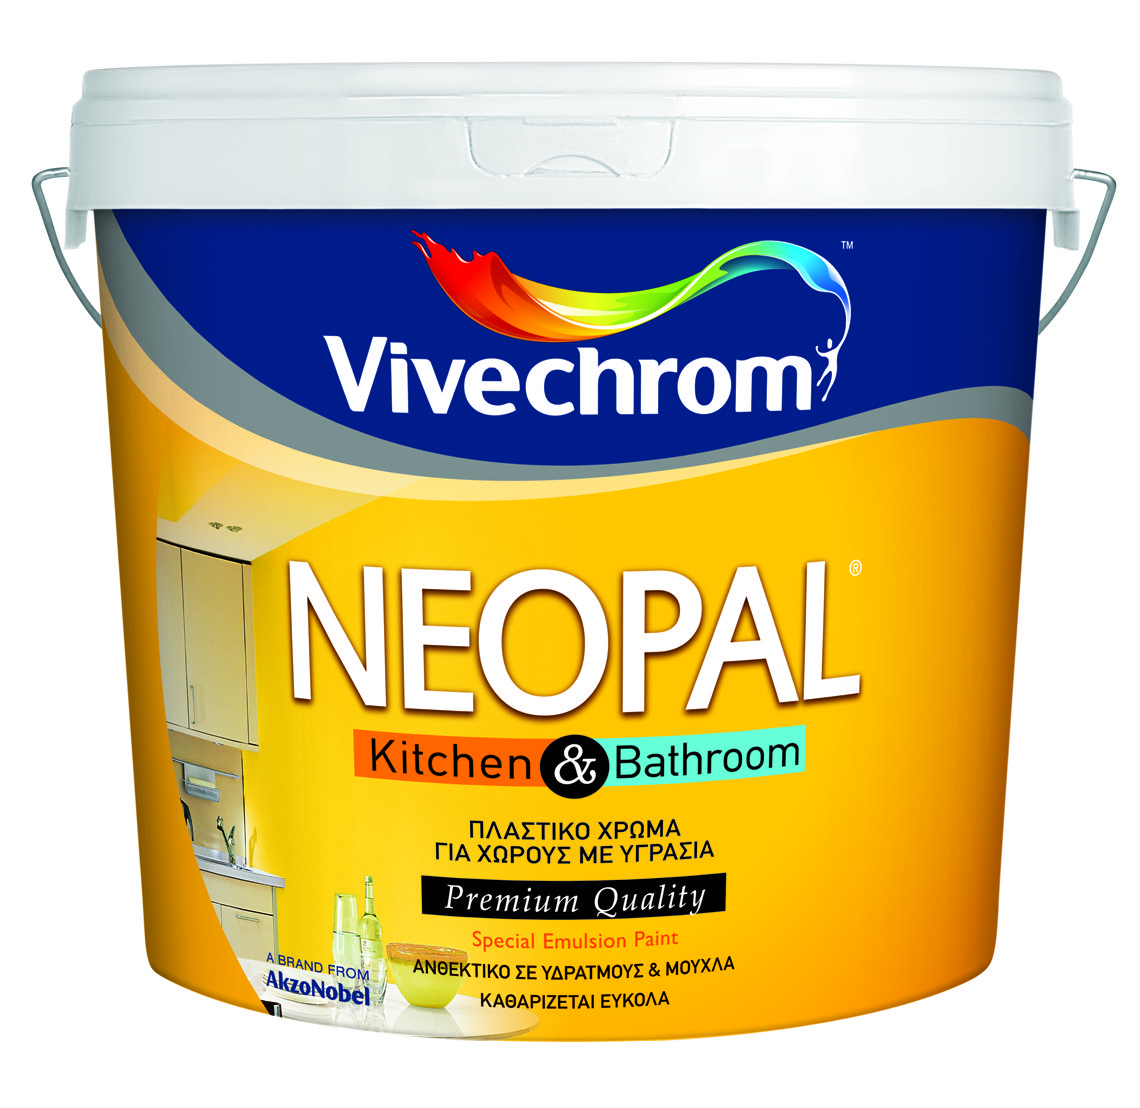 Vivechrom Neopal Kitchen & Bathroom Mixing Base D 10L